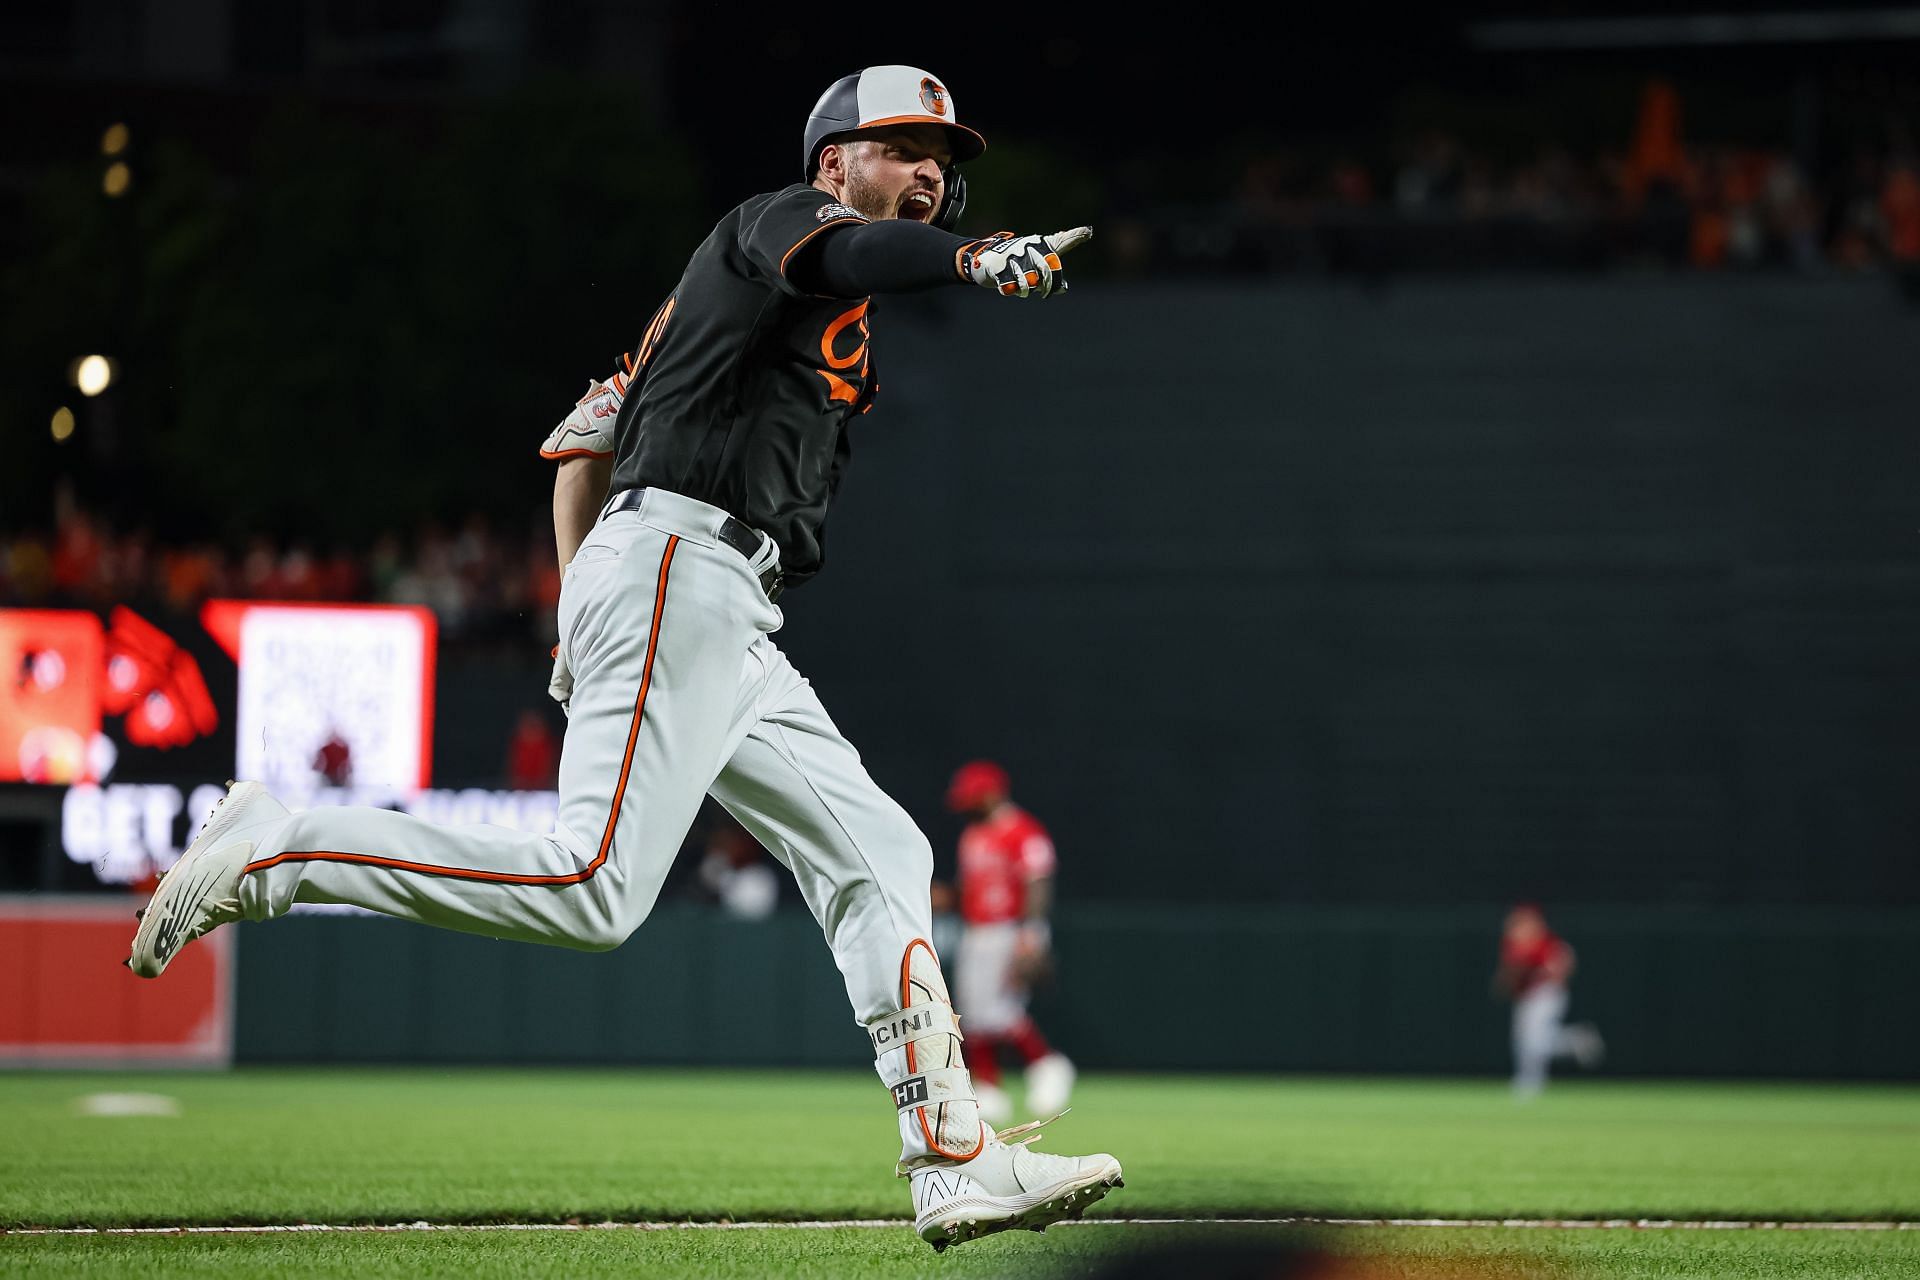 Trey Mancini completed a famous 5-4 comeback for the Baltimore Orioles.